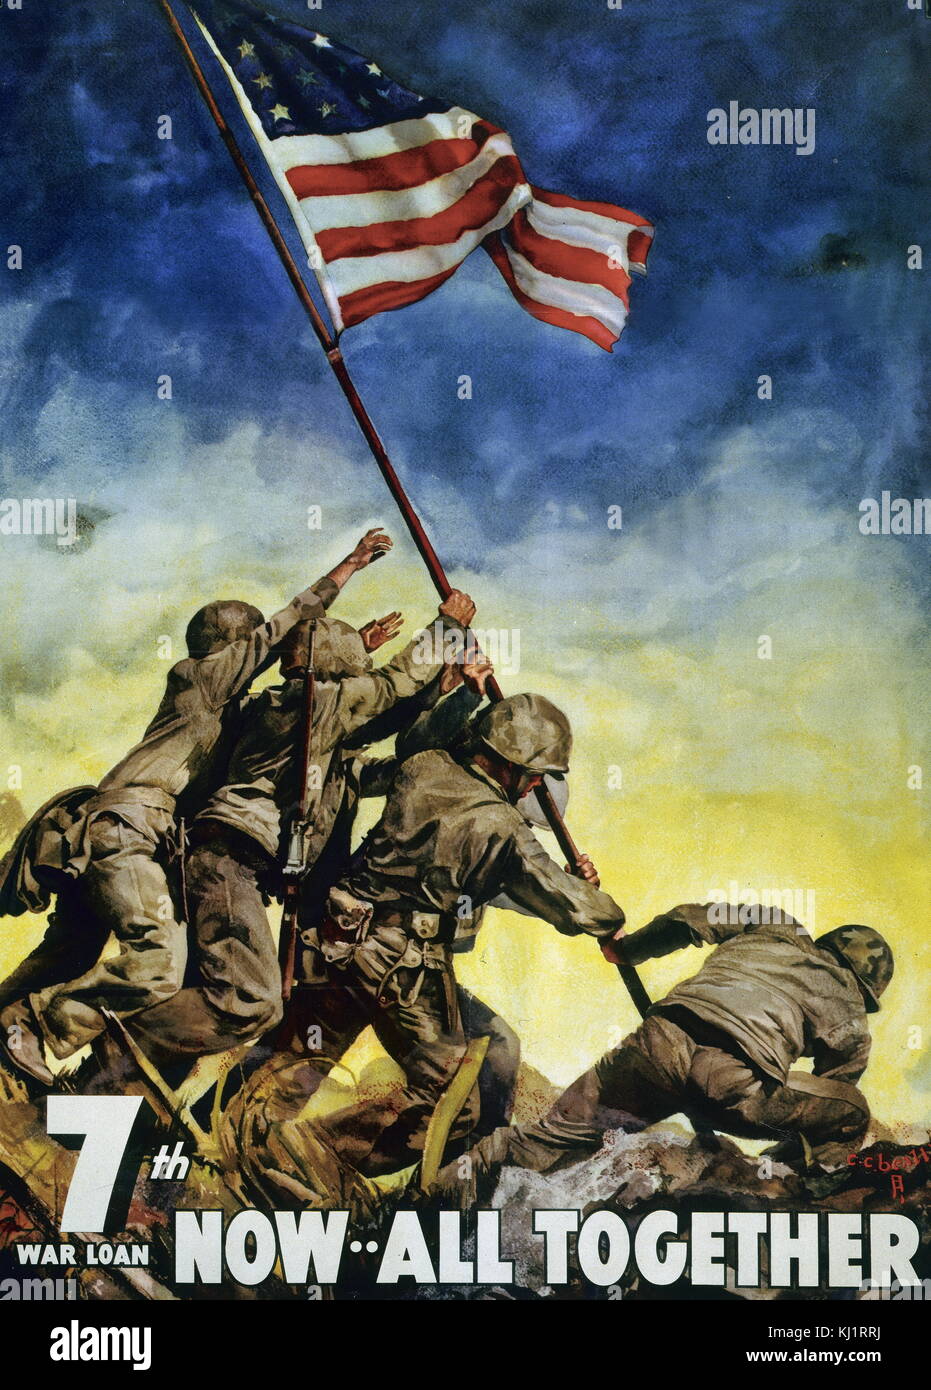 World War Two commemorative propaganda poster, showing U.S. Marines raising flag at Iwo Jima, during the advance on Japan in the Pacific war. Stock Photo